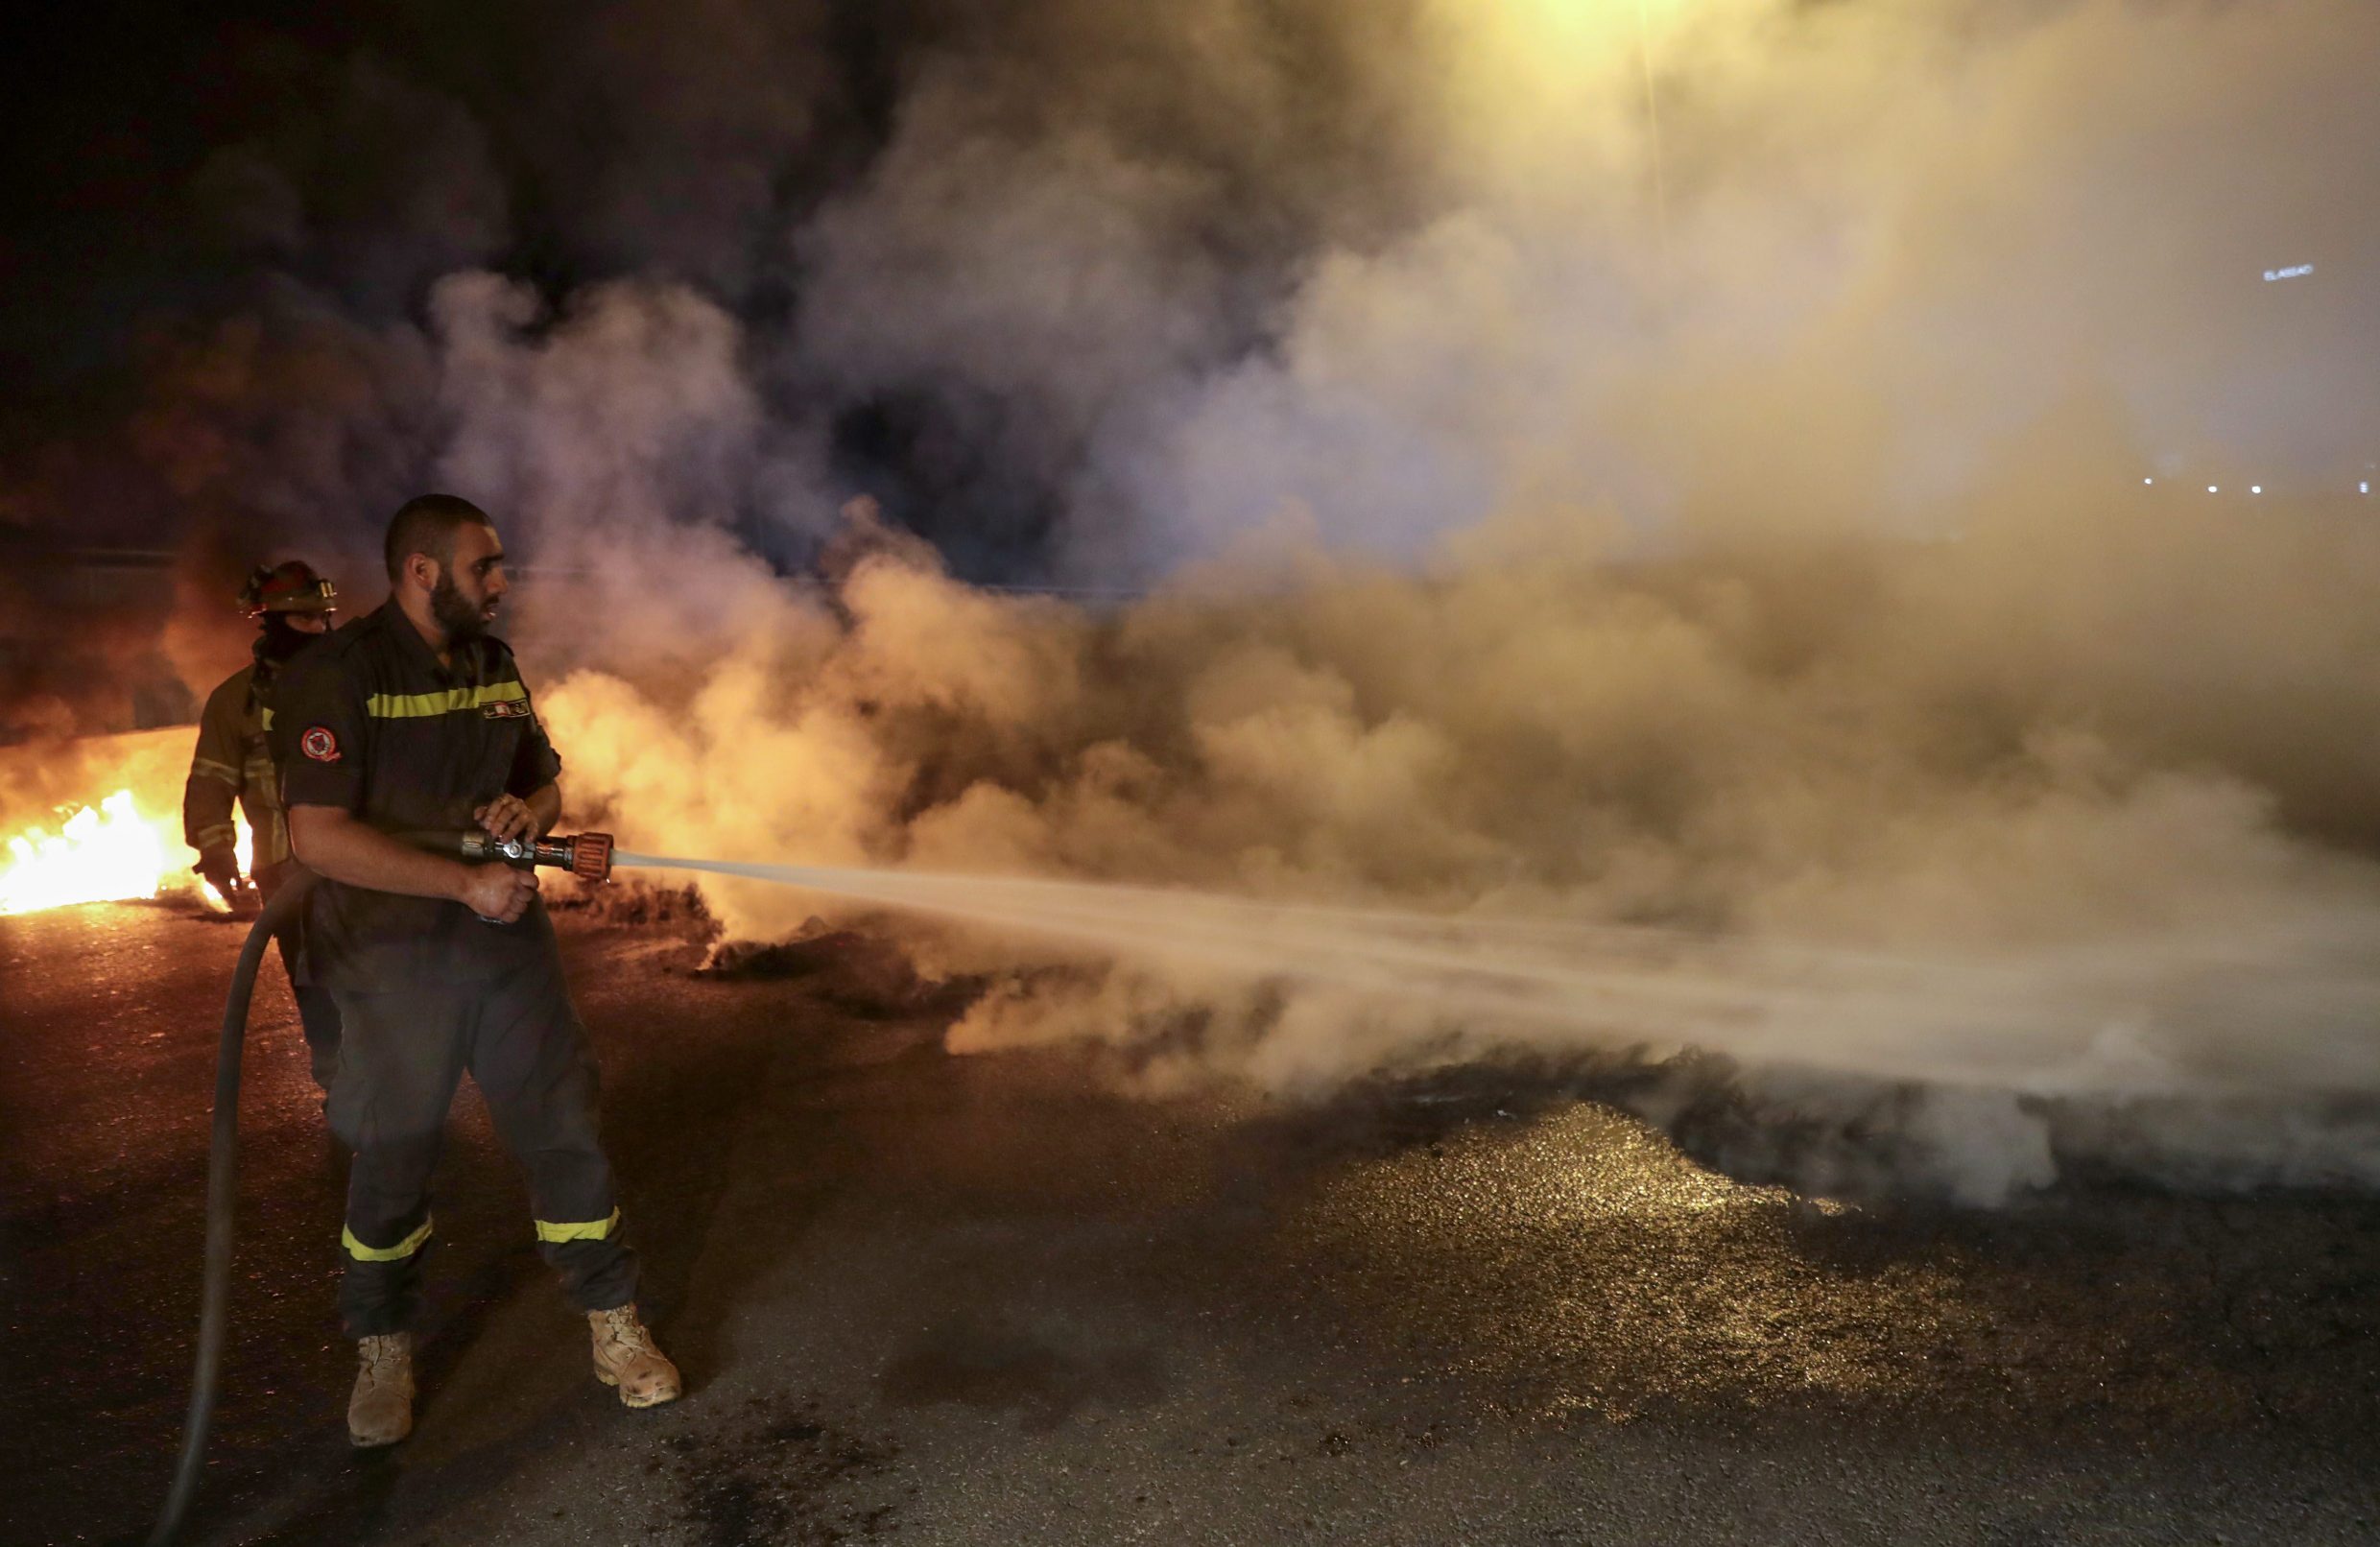 Members of the Lebanese civil defence quell burning tyres which anti-government protesters have set on fire, blocking the coastal highway north in the Dbayeh area, north of the capital Beirut, early on April 27, 2020, in protest of the deteriorating economic situation. - Lebanon's worst economic crisis since the 1975-1990 civil war is now compounded by the coronavirus lockdown and nighttime curfew. Still, protesters have staged several daytime demonstrations recently, in continuation of a nationwide protest which erupted in October last year. (Photo by ANWAR AMRO / AFP)